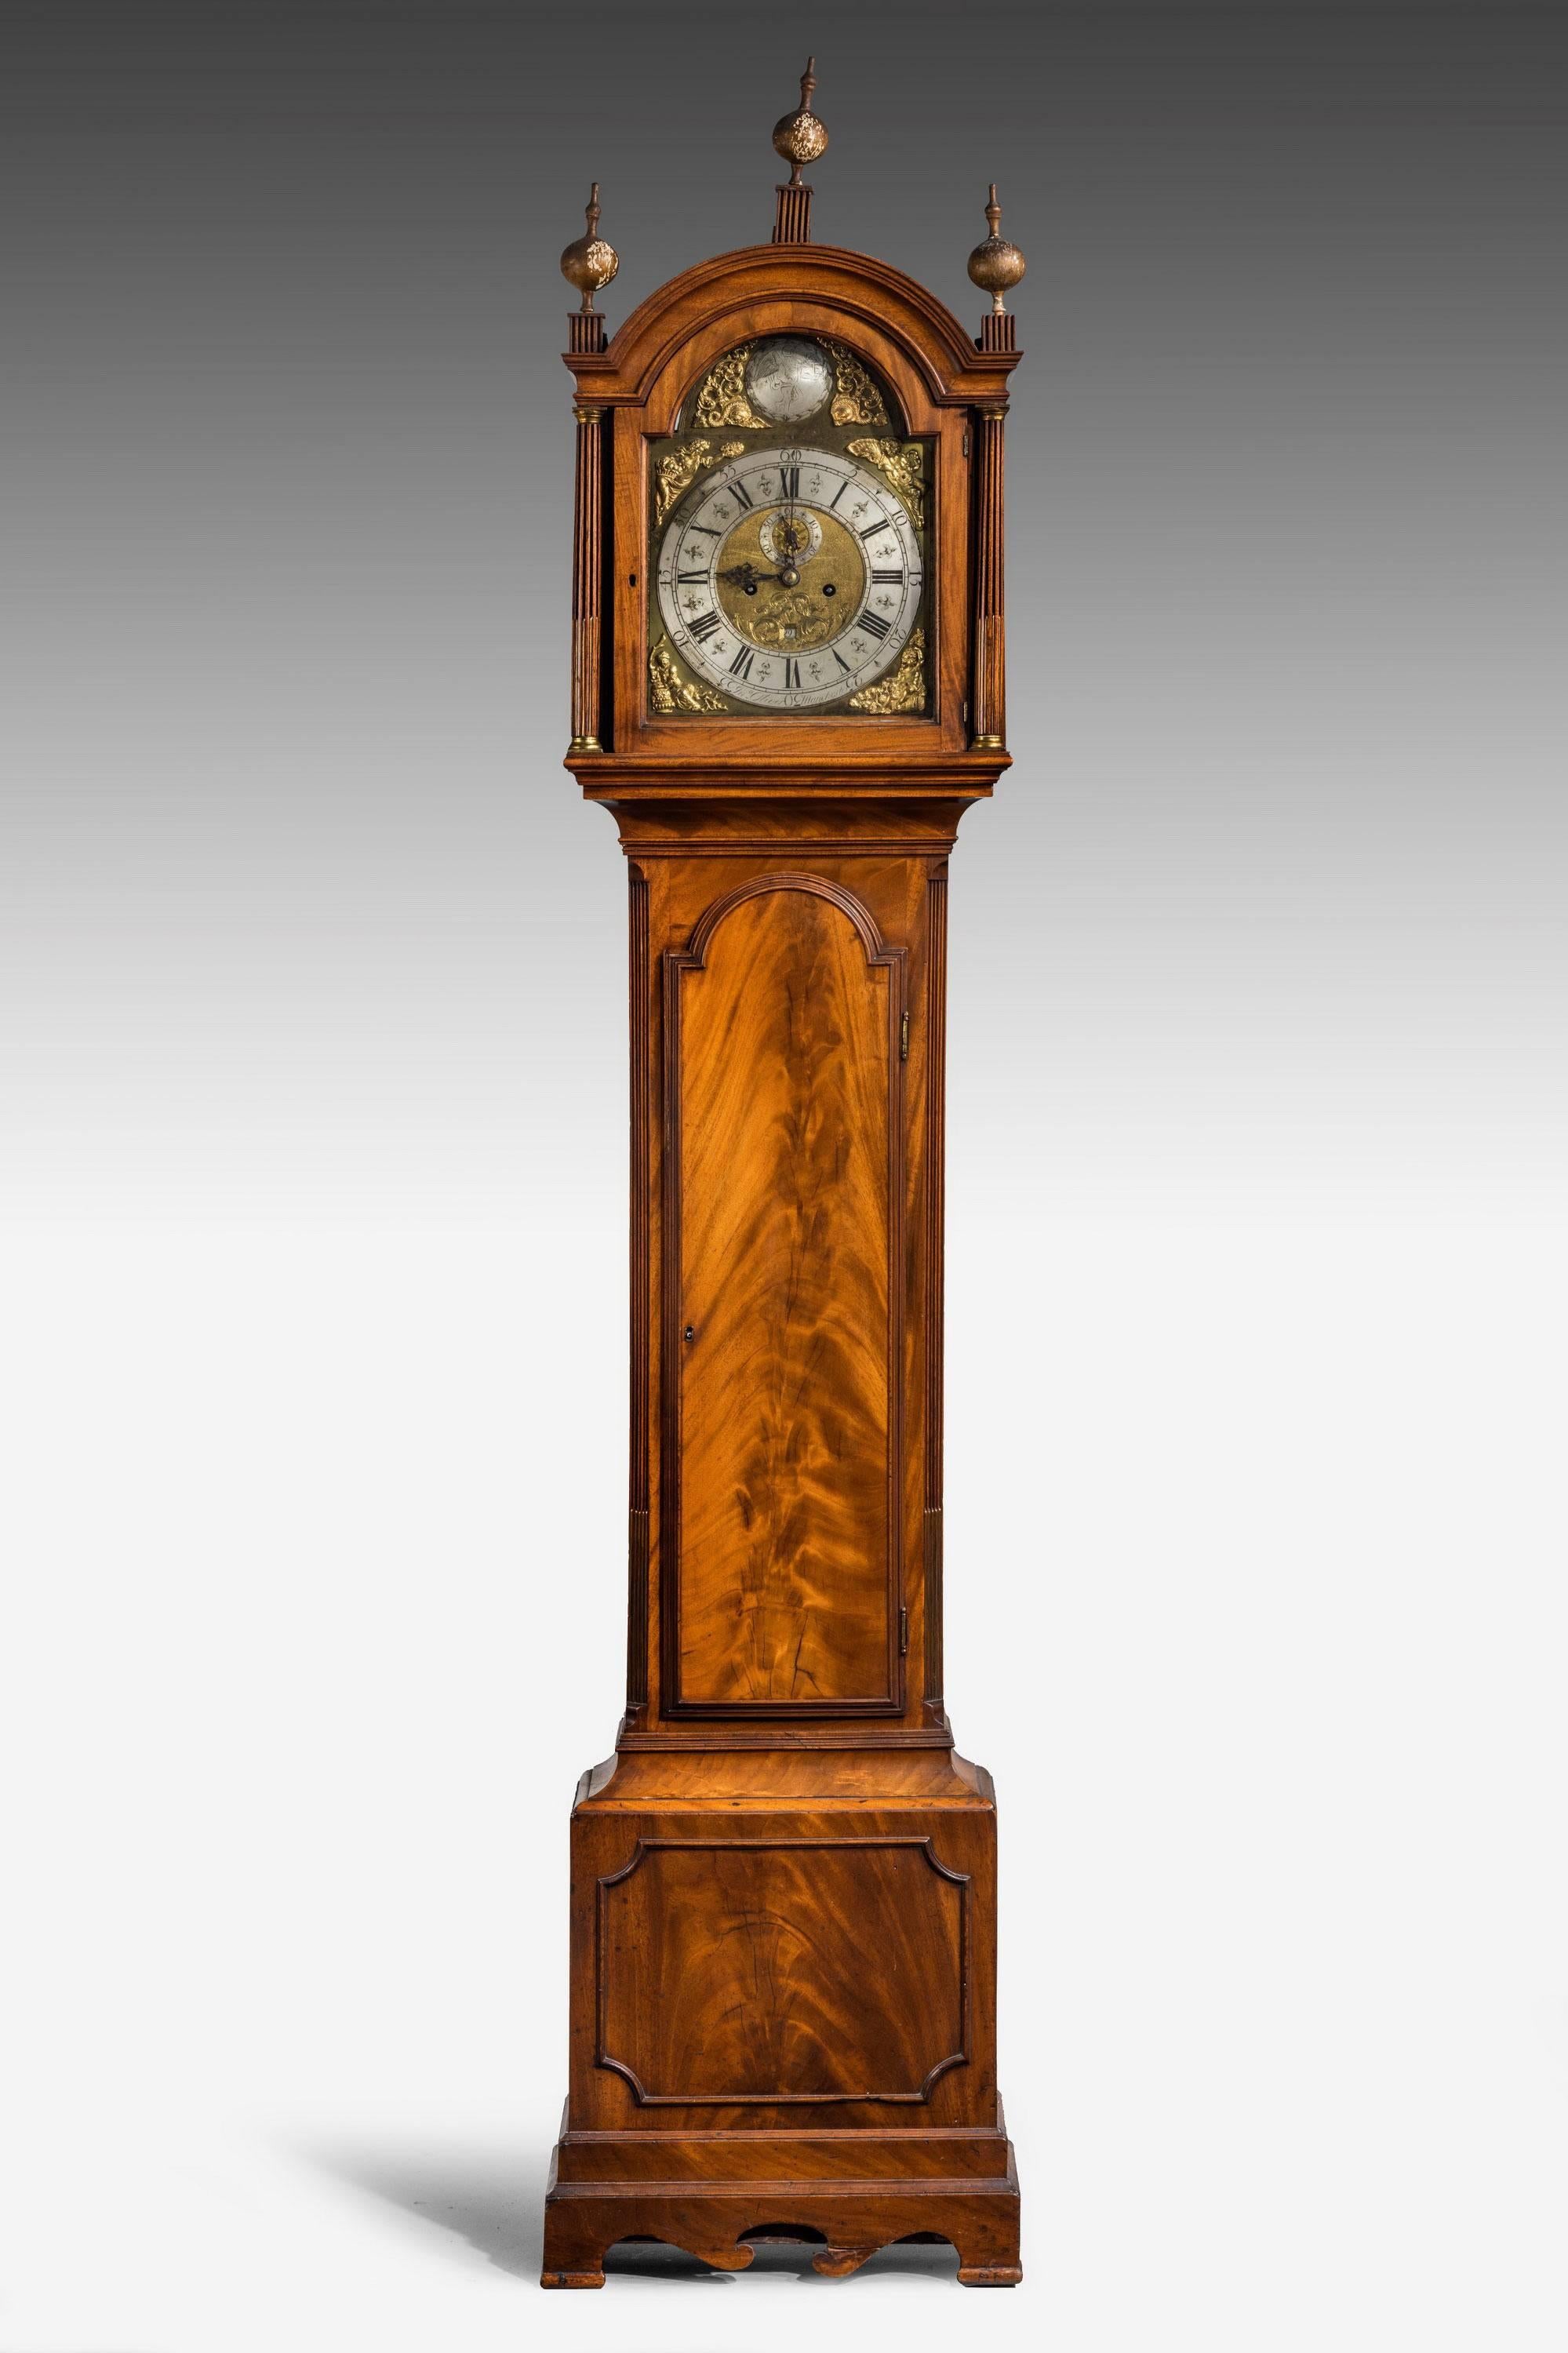 A fine George III period mahogany longcase clock by John Oliver of Manchester. The silver and gilt bronze dial in original condition with an arched top finely engraved with farther time. Period finals to the top section. The arched door finely